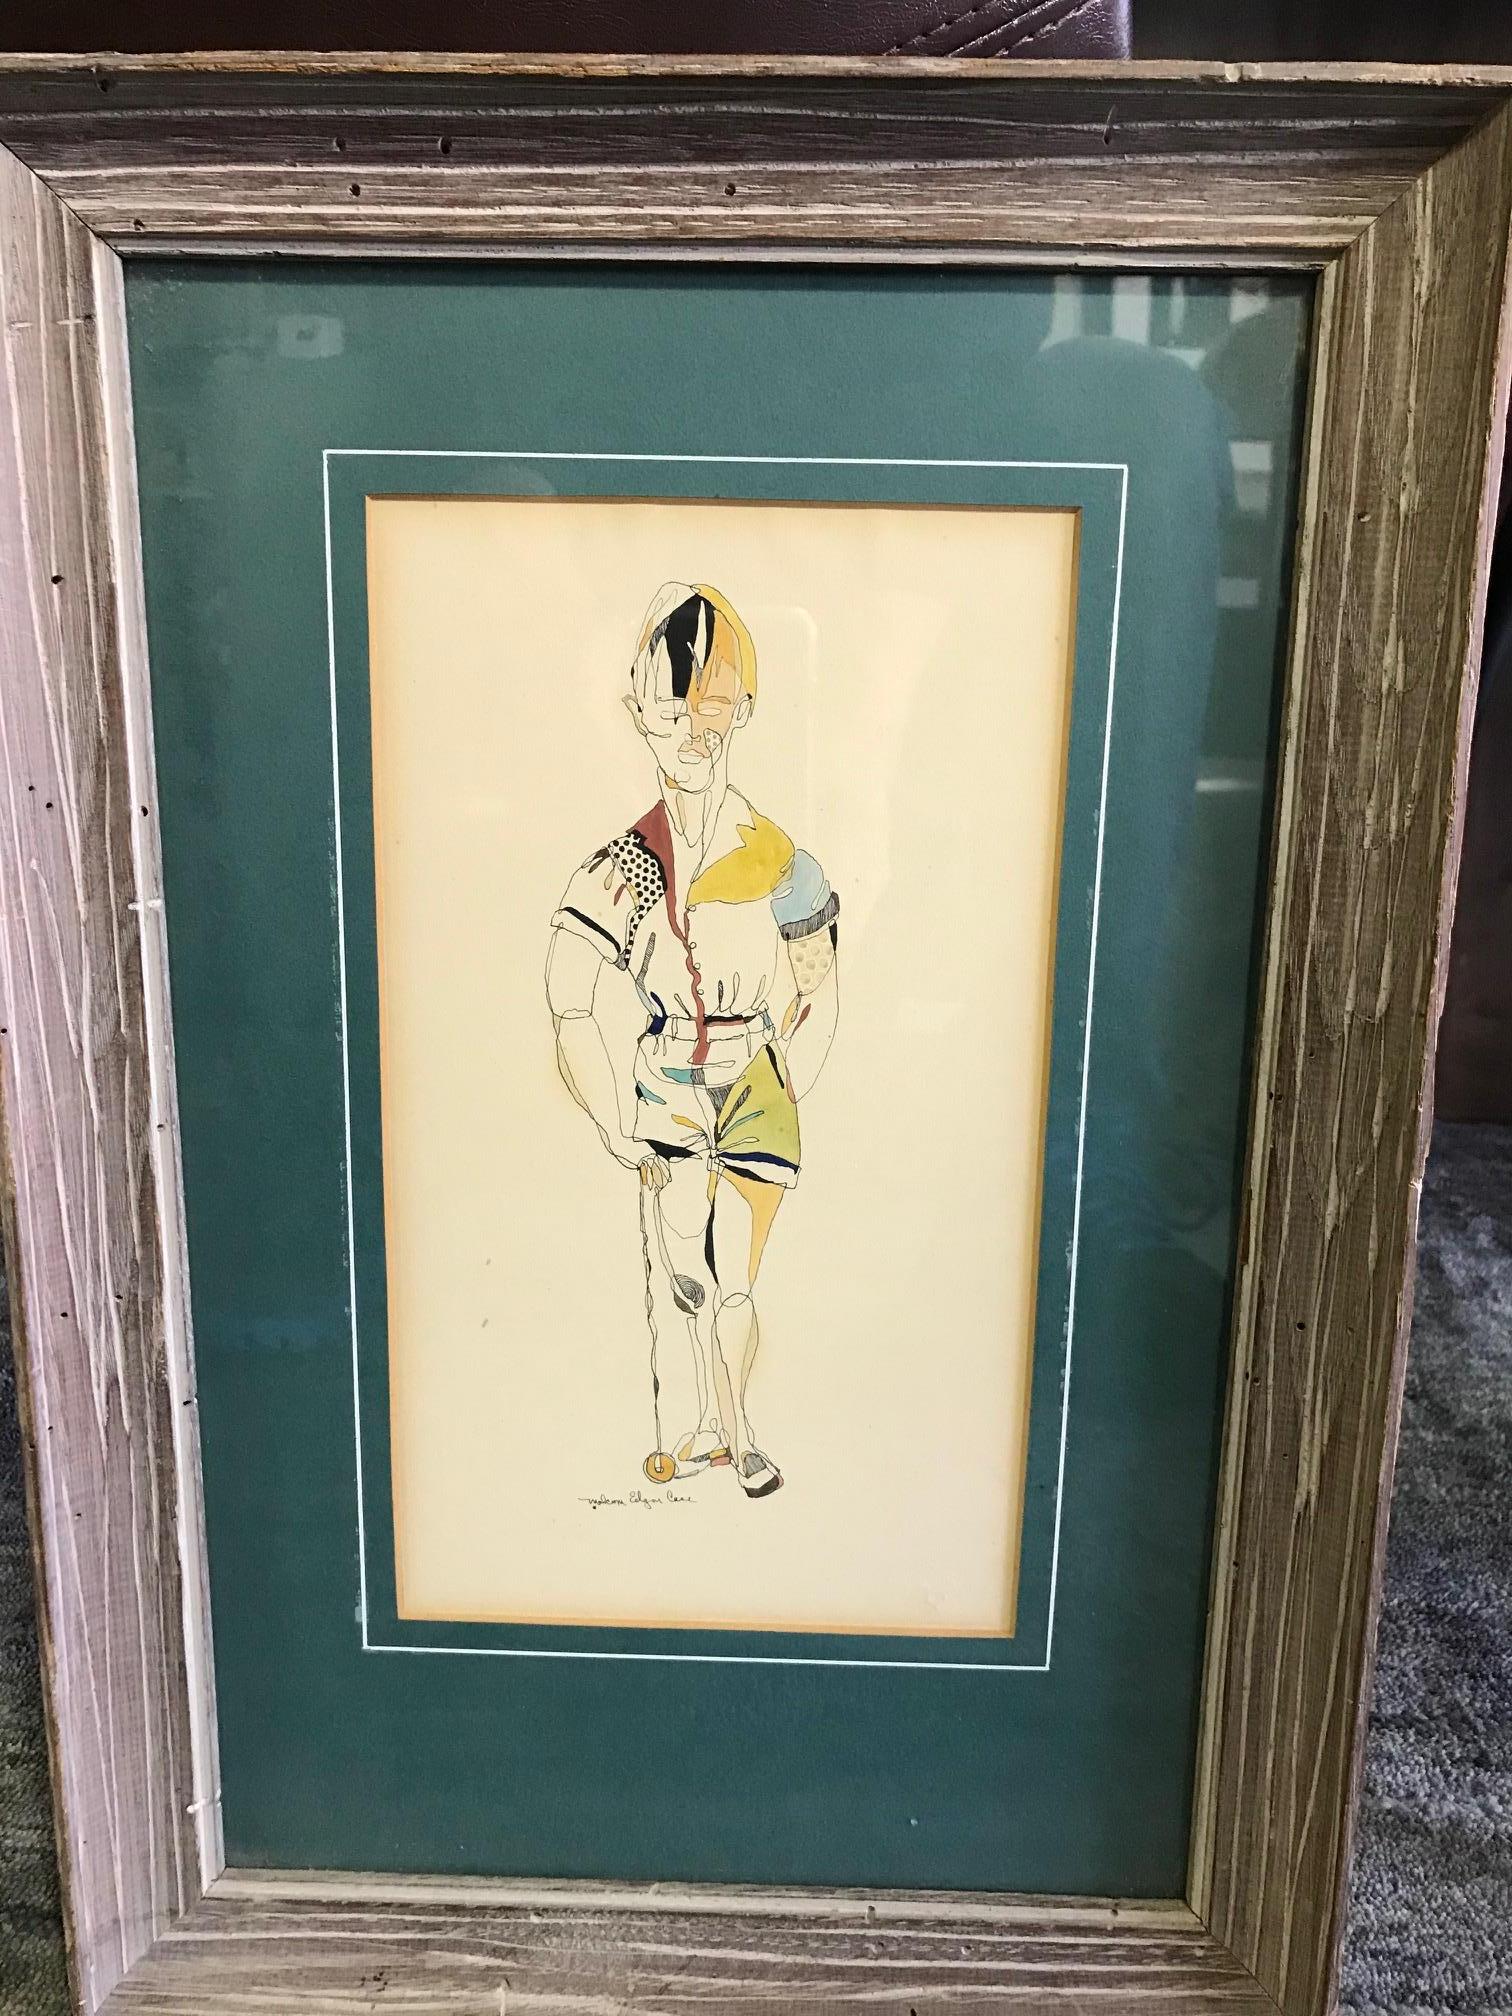 An original work by American artist Malcolm Edgar case.

Signed by the artist below the image.

Framed dimensions: 17.5